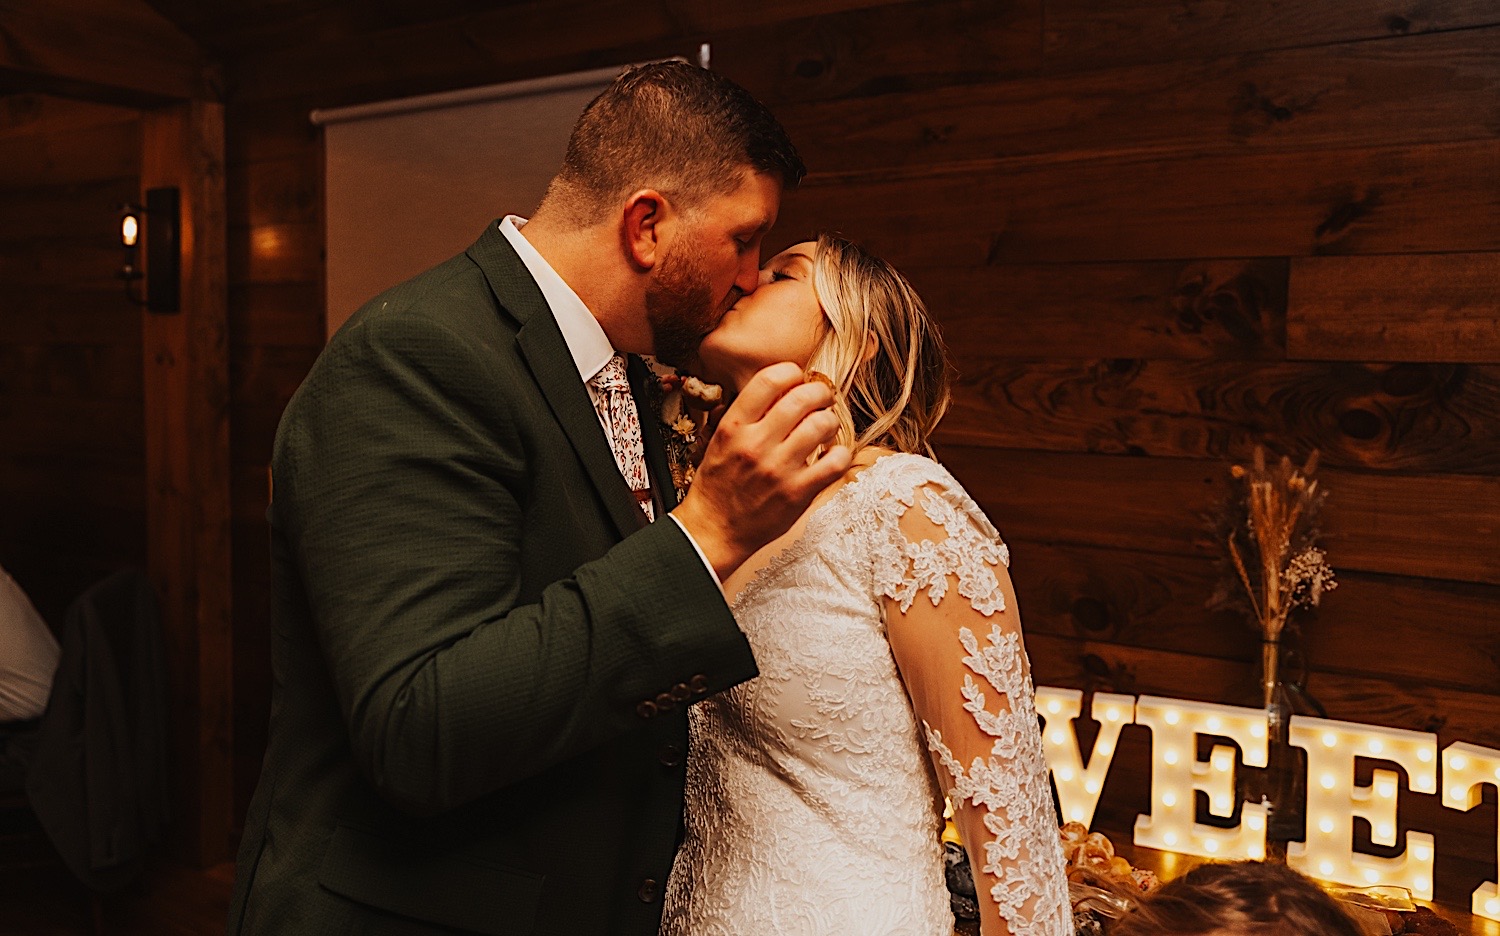 A bride and groom kiss one another during their indoor wedding reception at Lake Bomoseen Lodge in Vermont